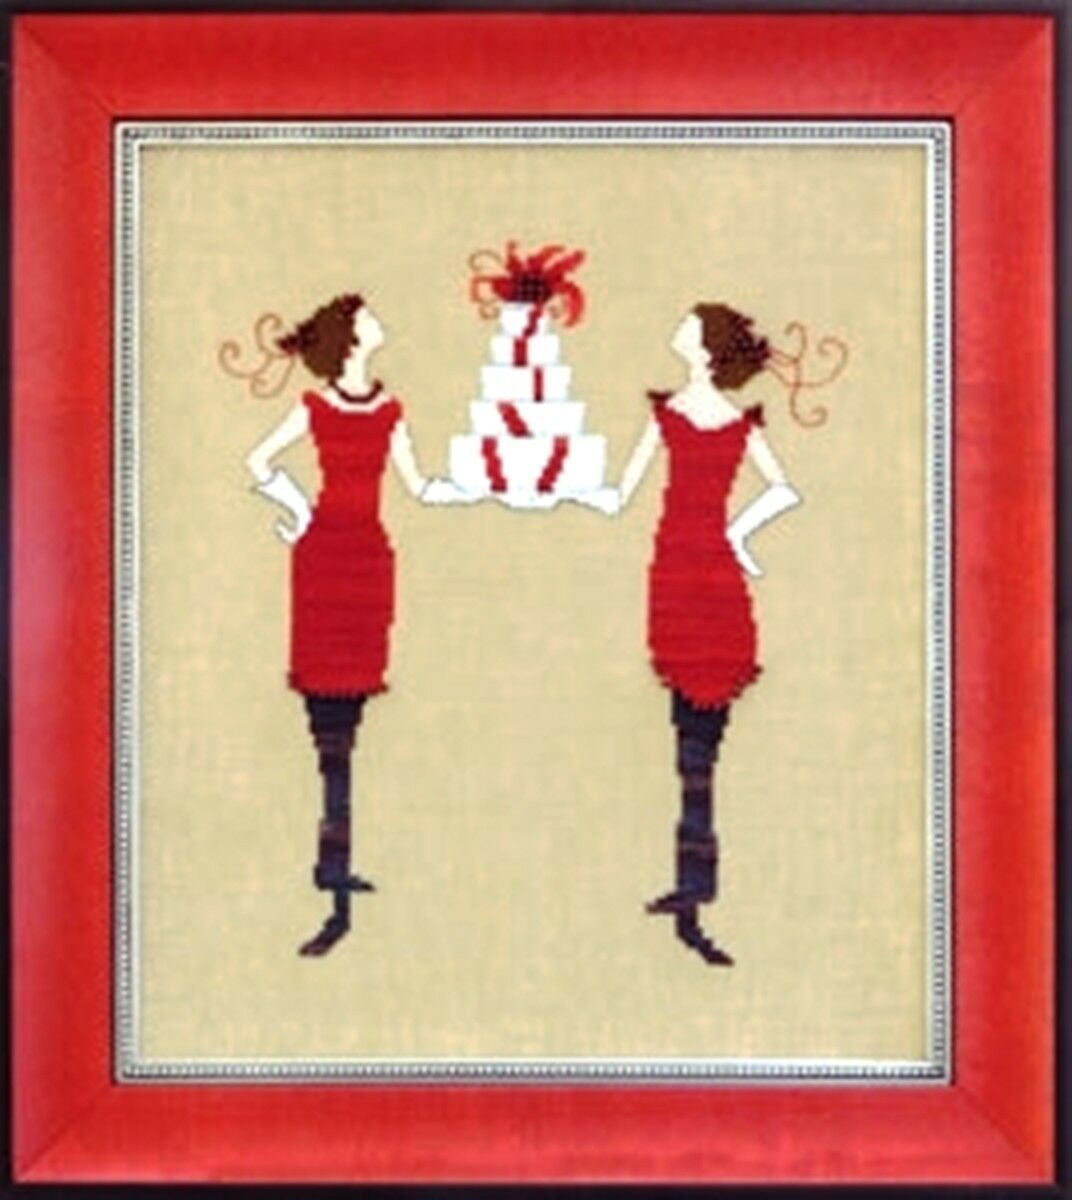 Primary image for COMPLETE XSTITCH MATERIALS "RED GIFTS  NC172" by Nora Corbett